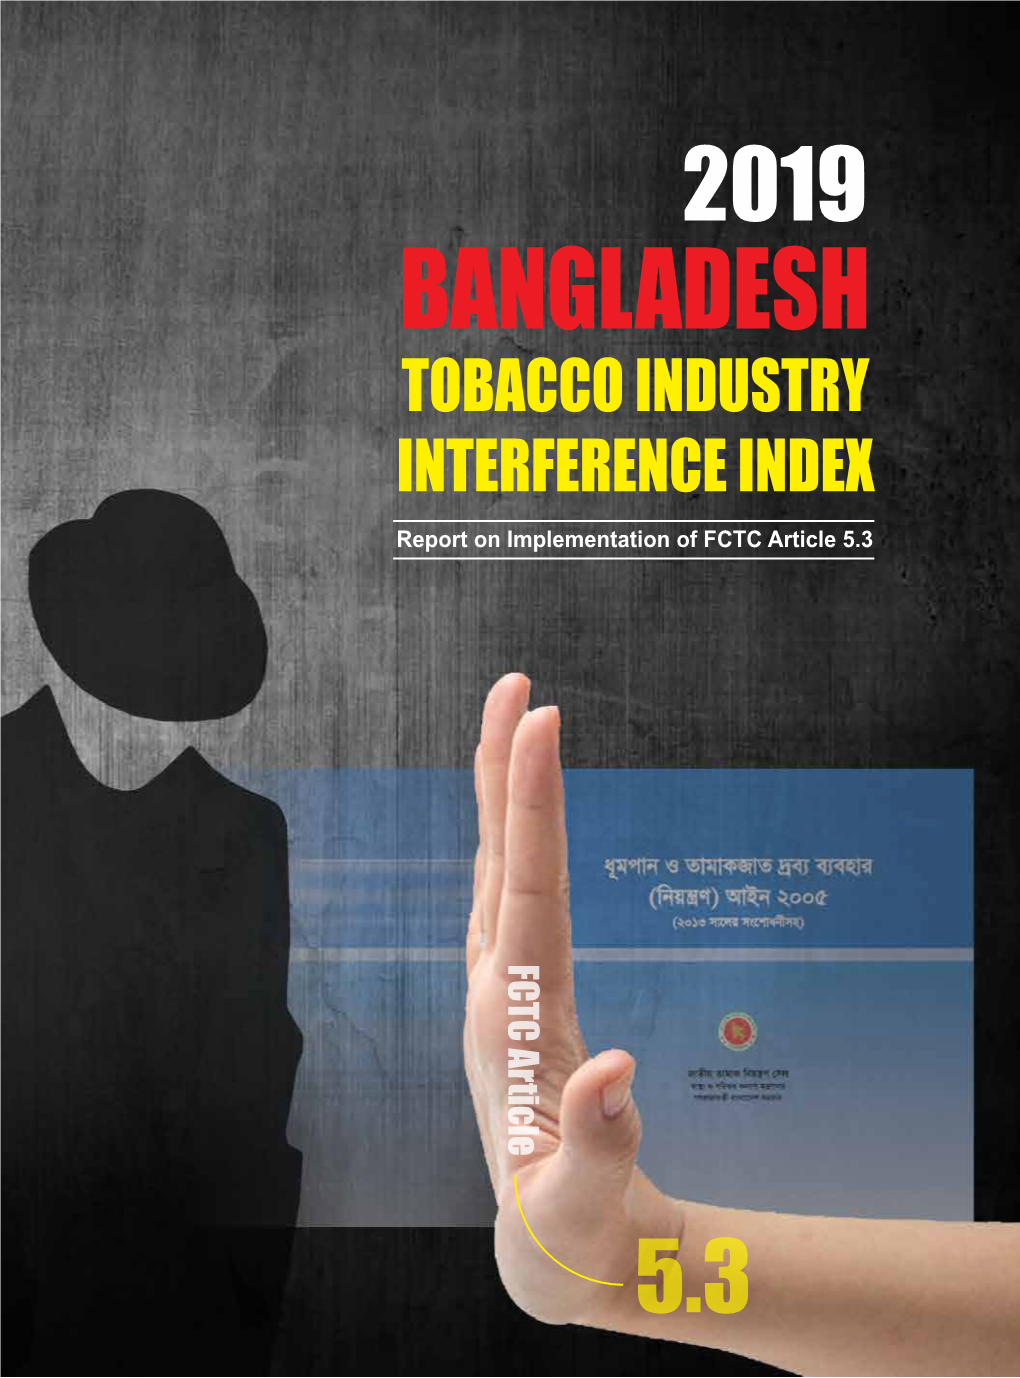 Bangladesh Tobacco Industry Interference Index 2019